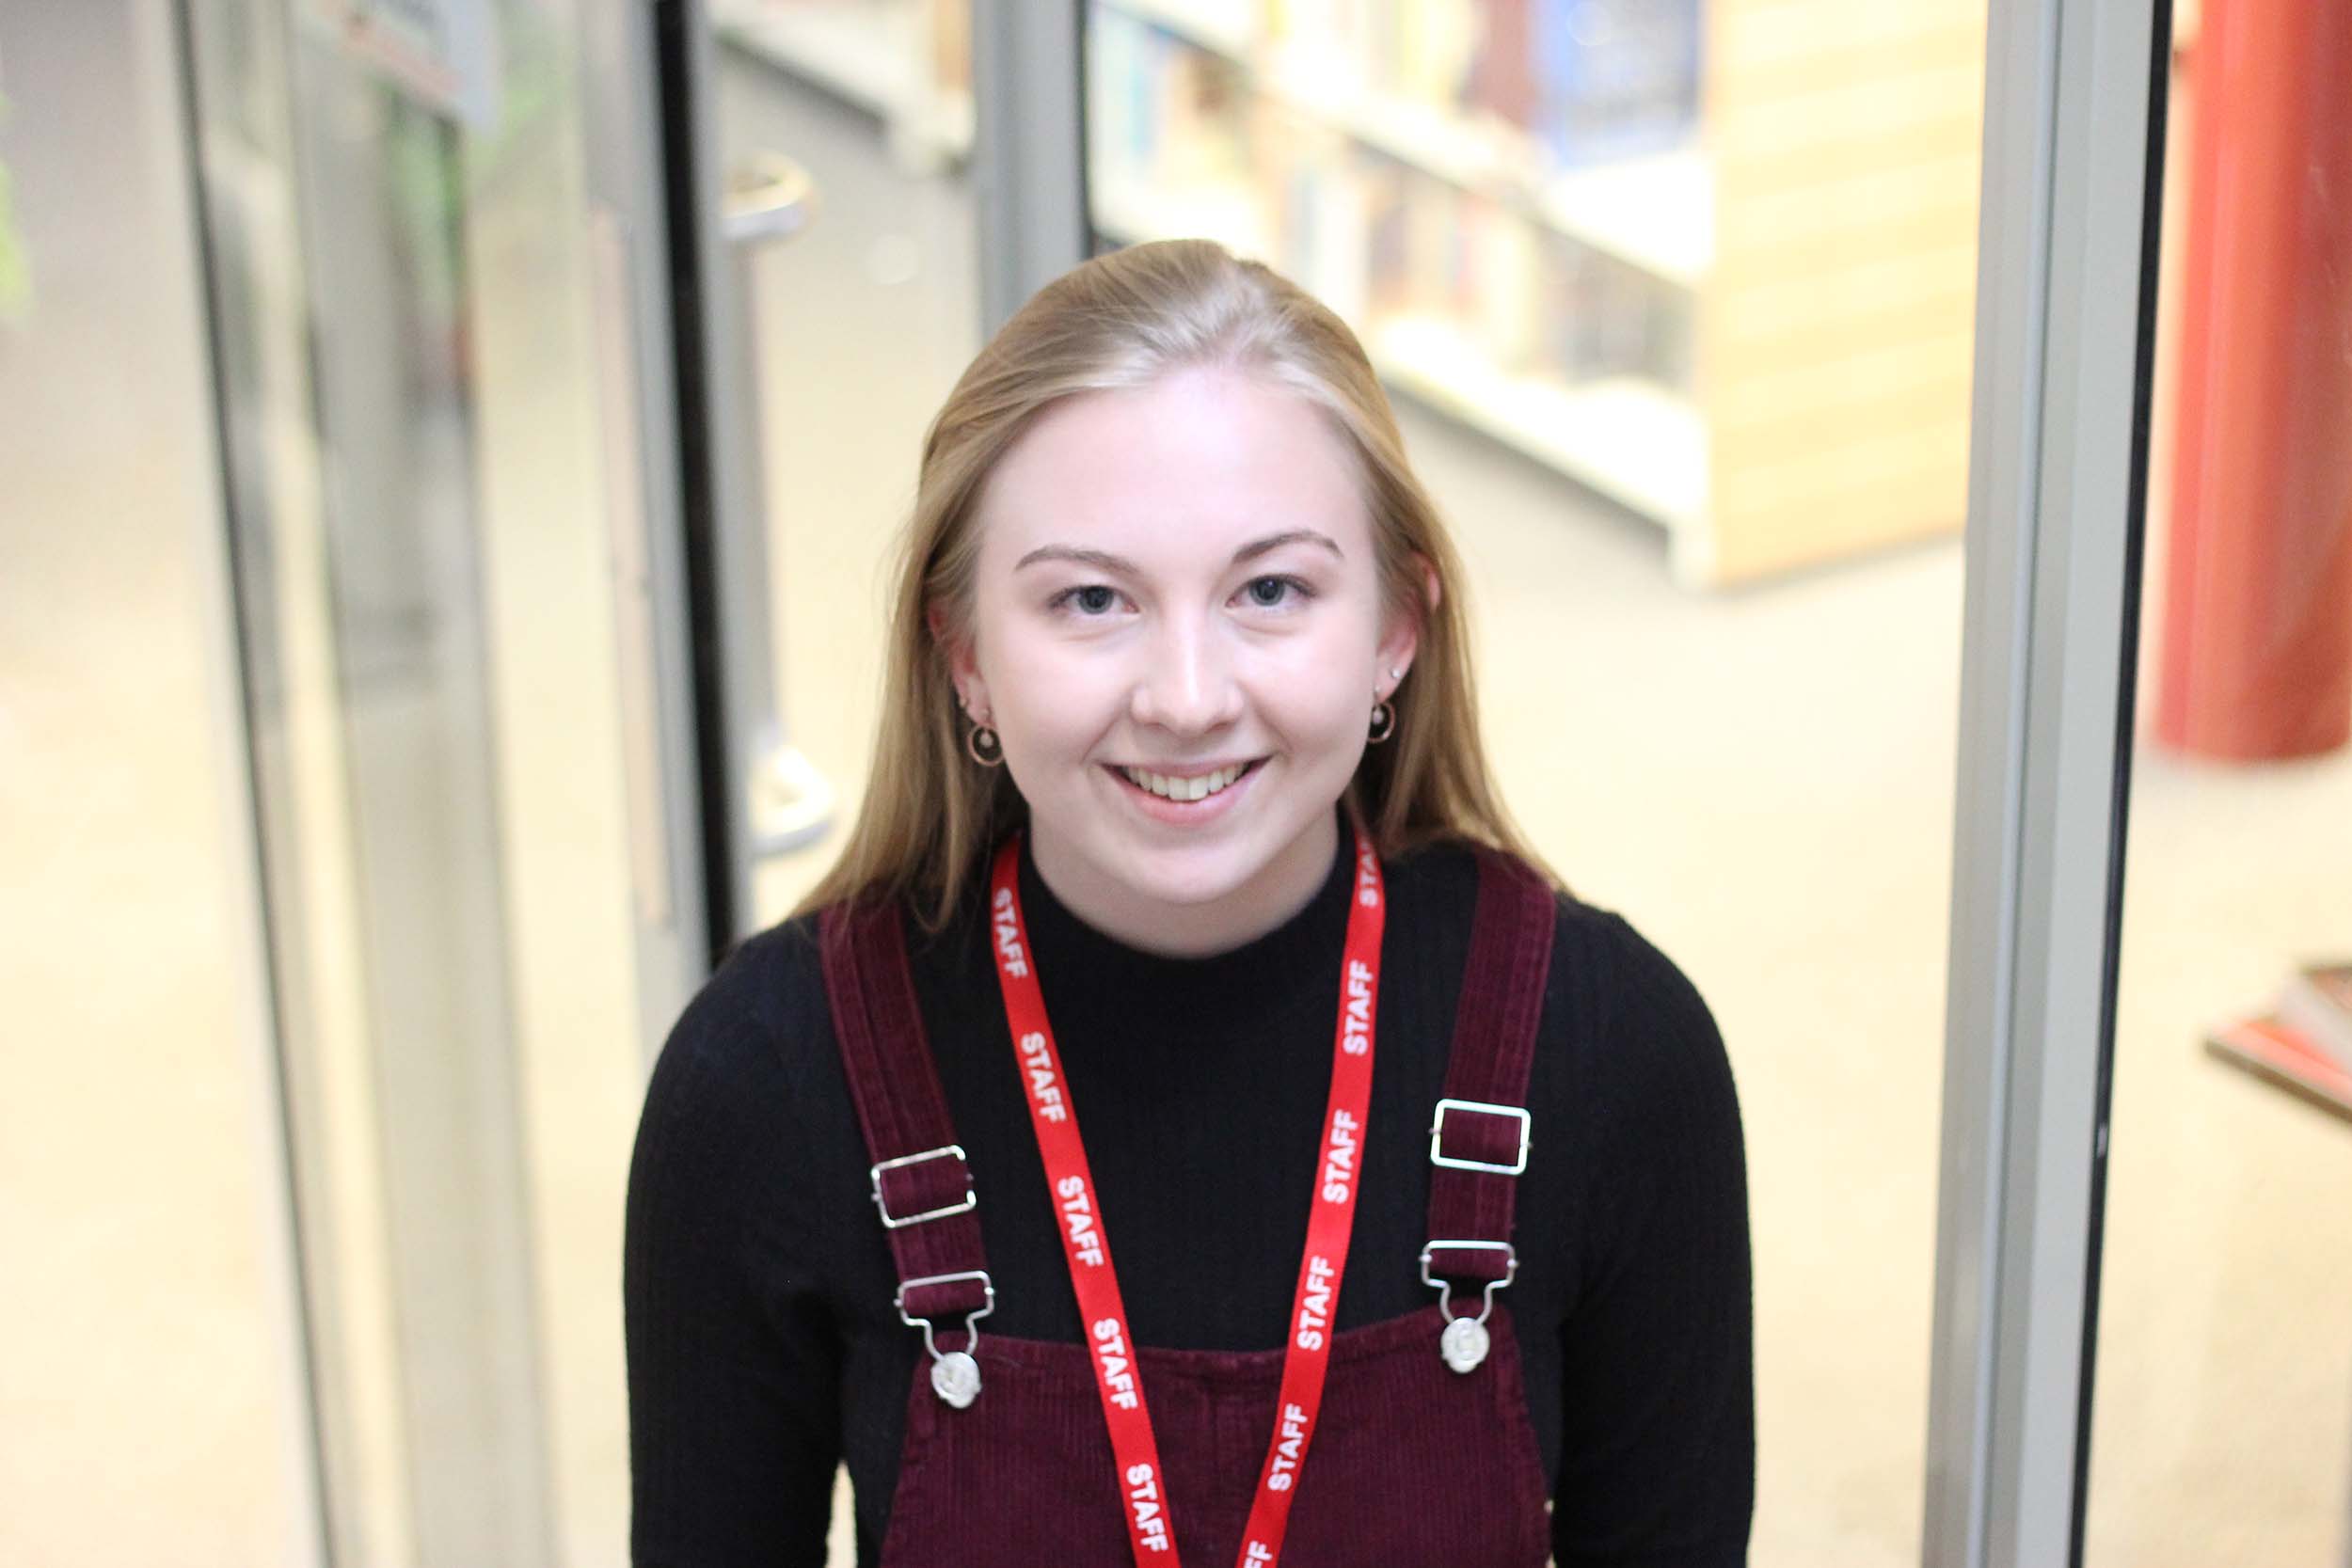 Hats off to Hannah - Perth College UHI apprentice is ‘Apprentice of the Year’ finalist 